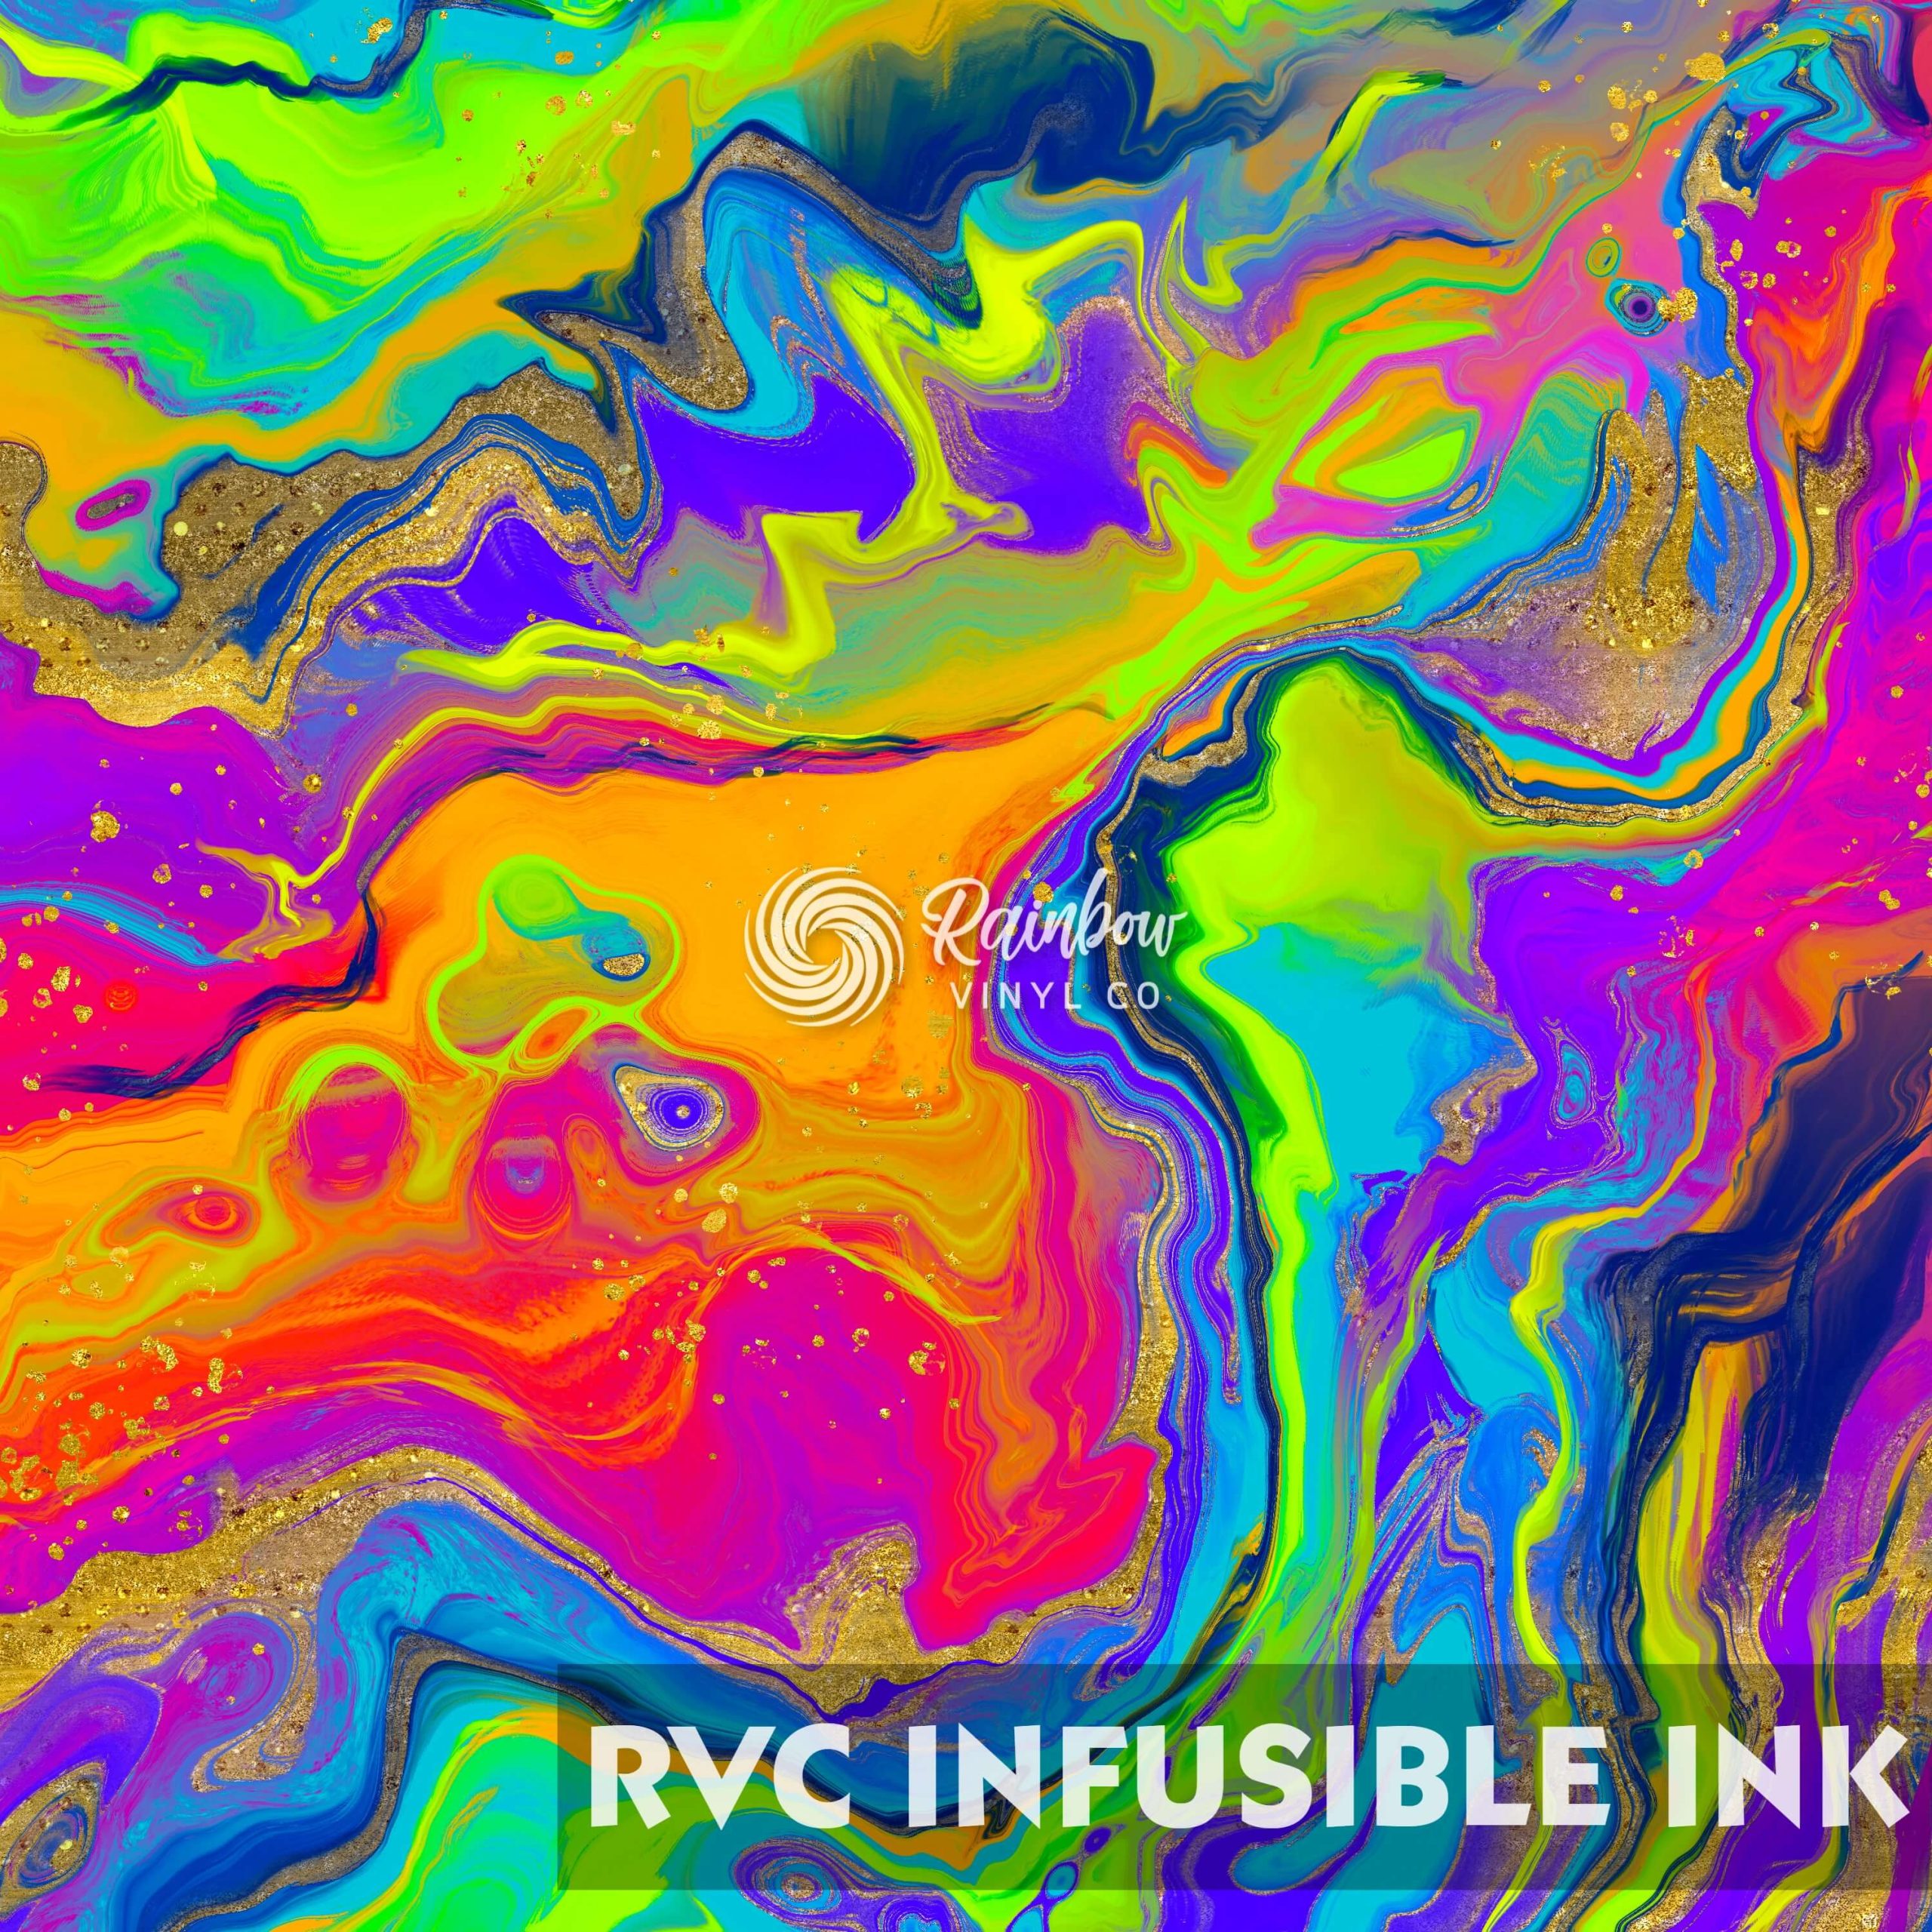 RVC Infusible Ink Sheets – Hypnotic - Rainbow Vinyl Co